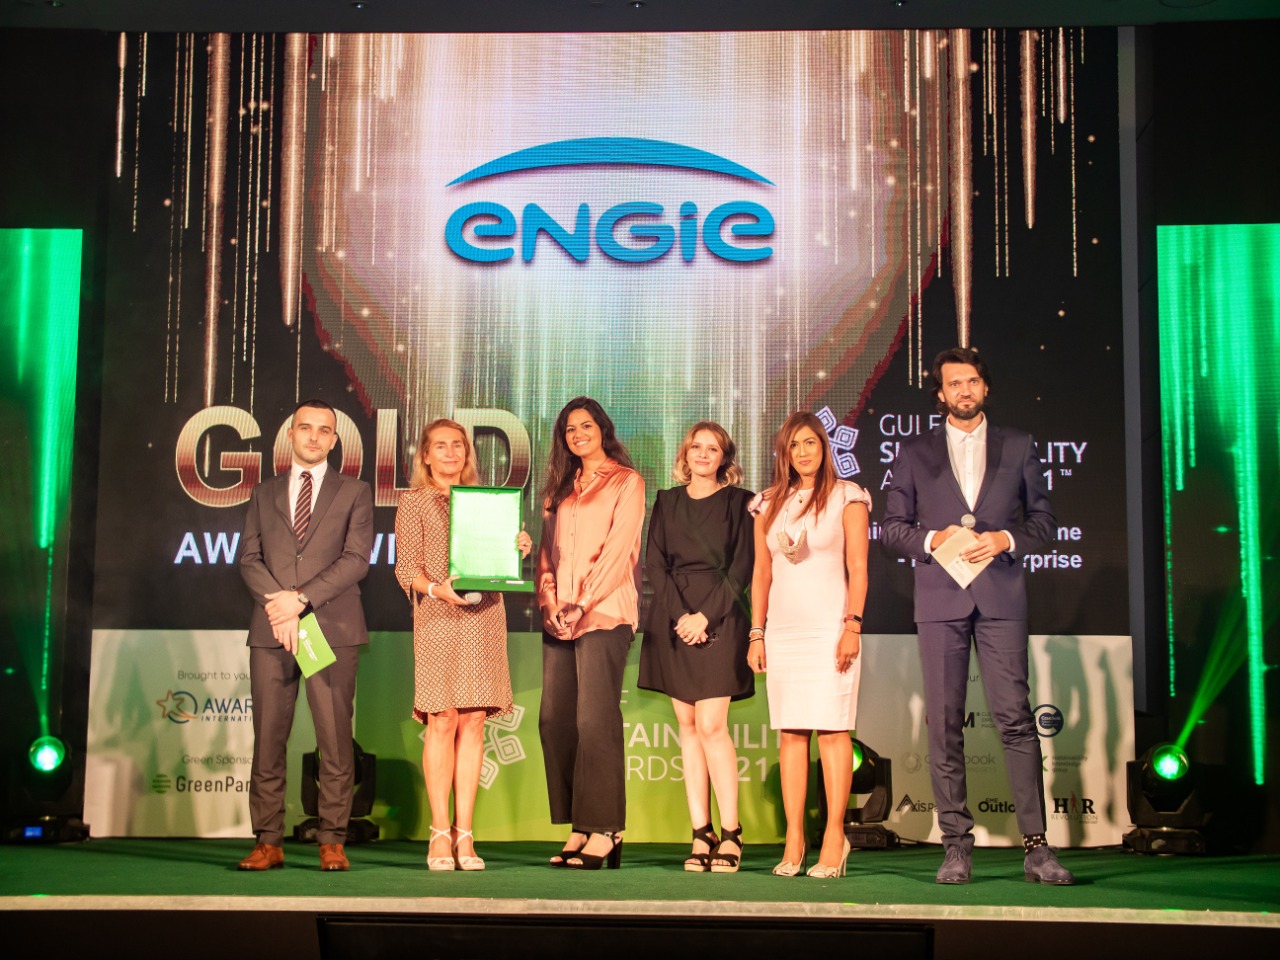 ENGIE’s Environmental Preservation Efforts Celebrated at Gulf Sustainability Awards 2021